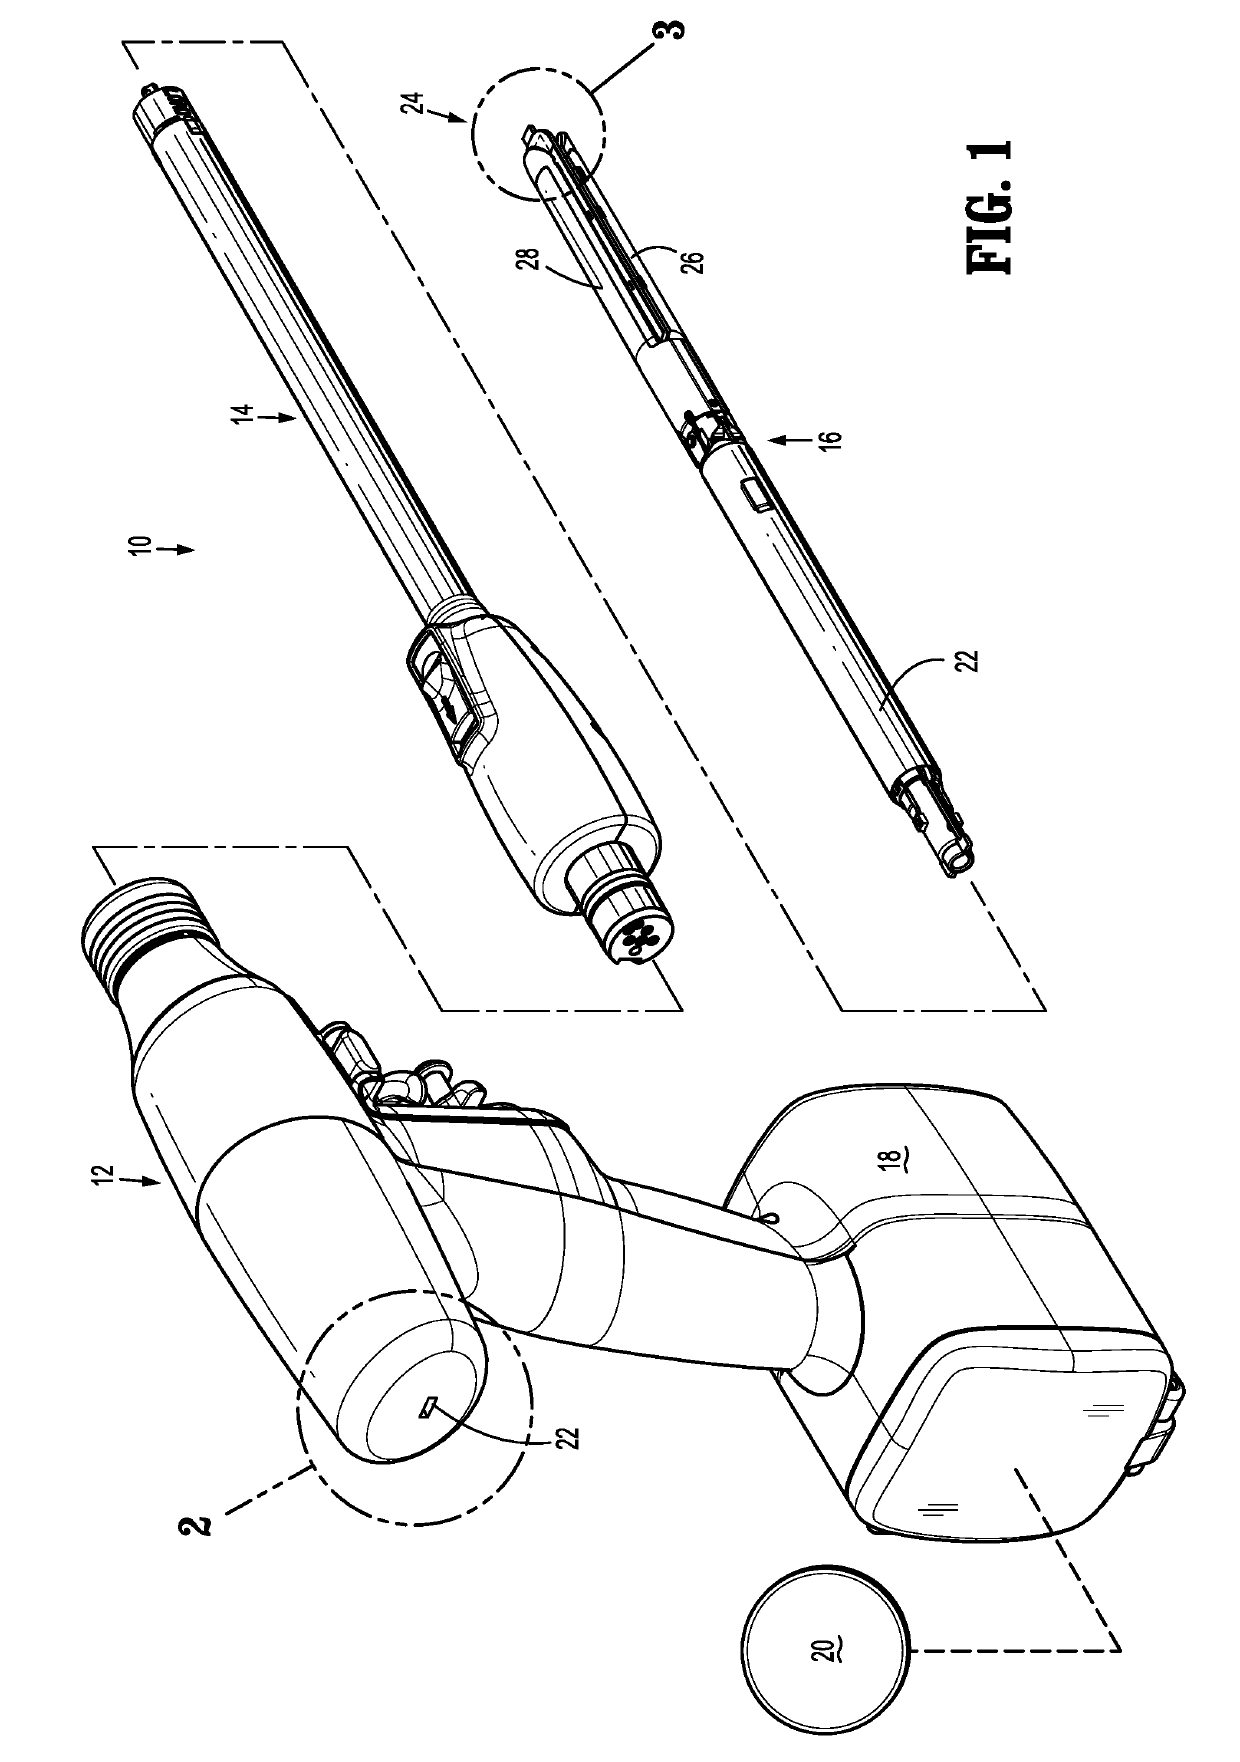 Authentication and information system for reusable surgical instruments